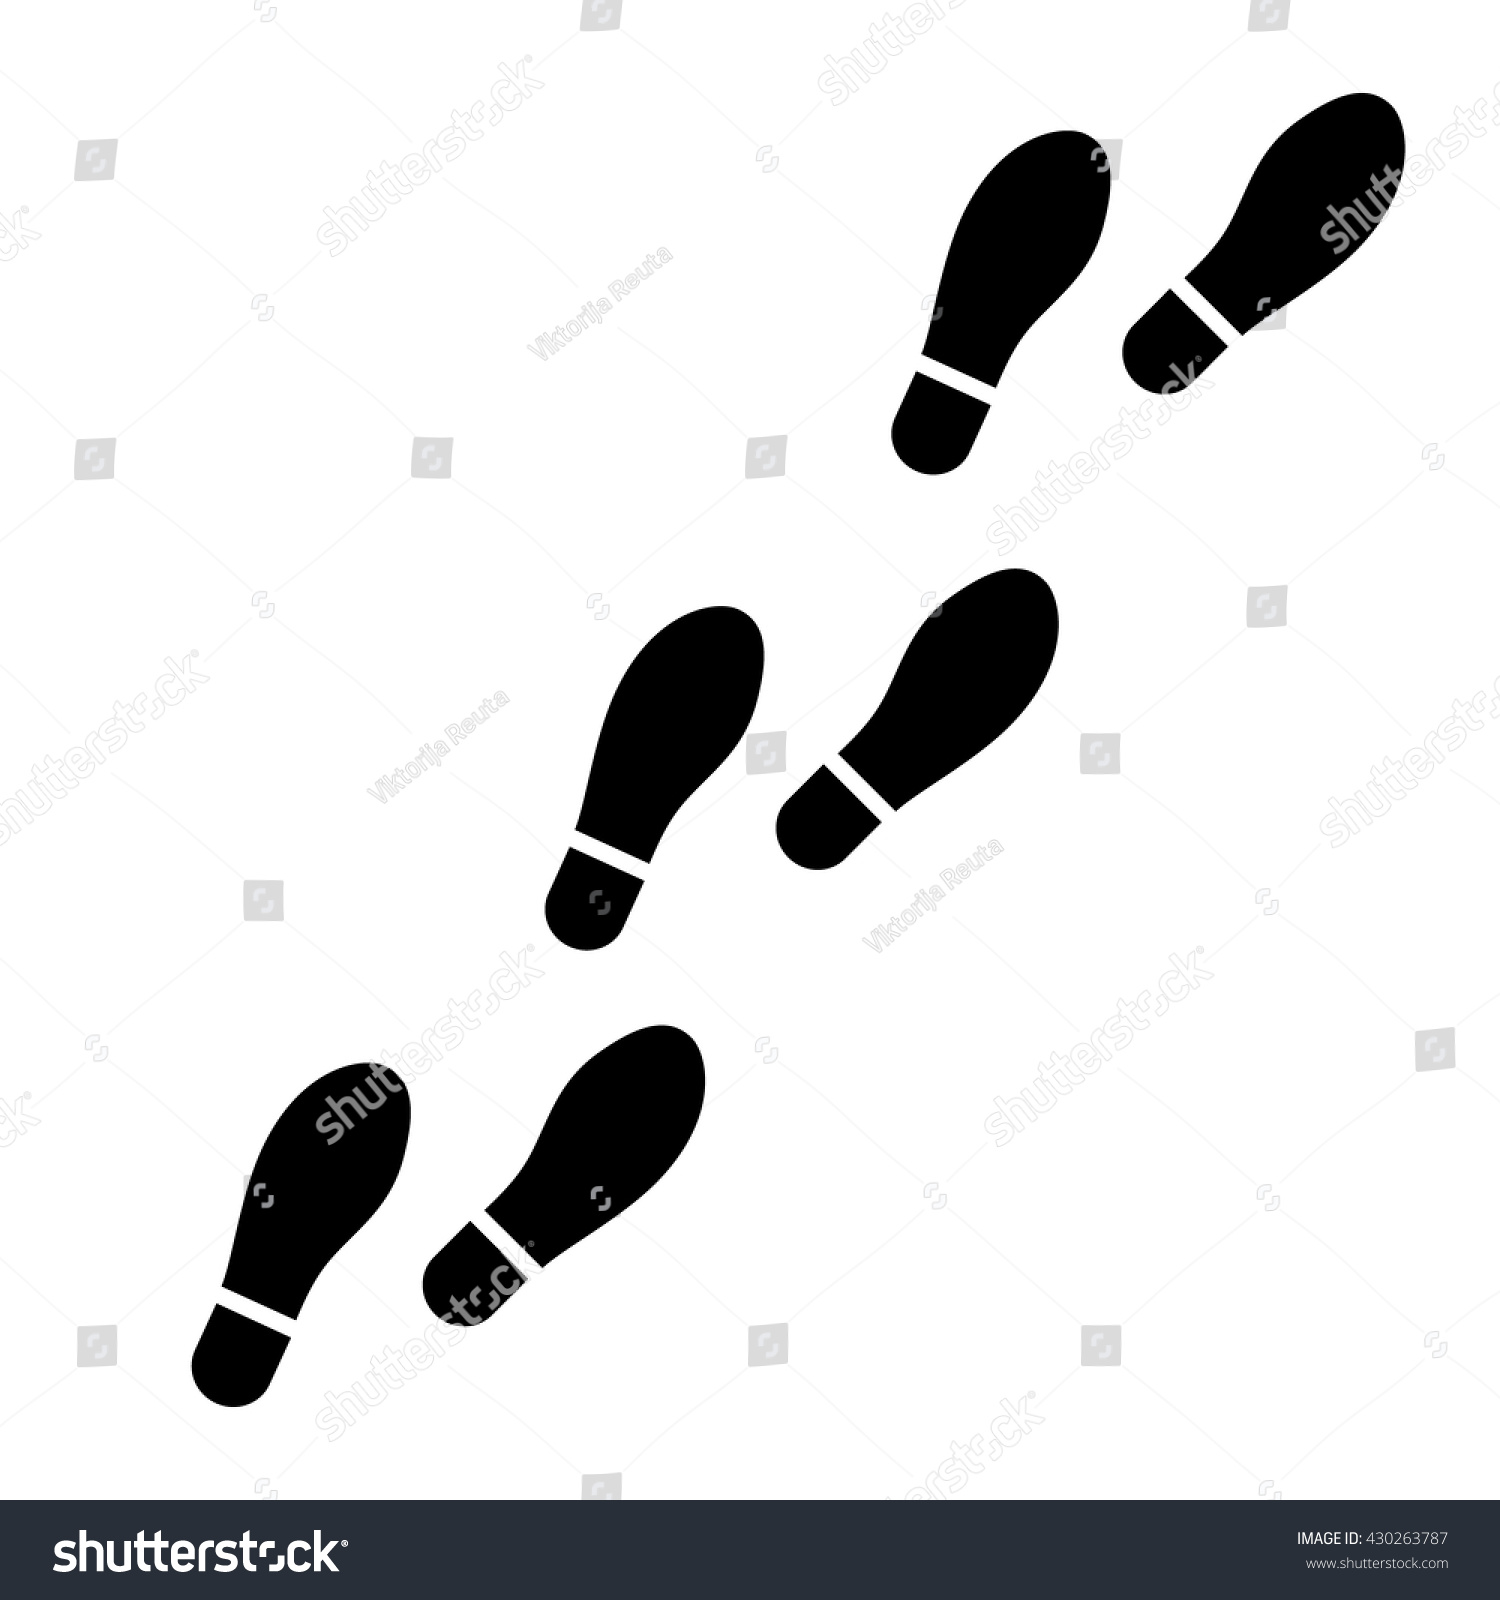 Vector illustration trail of shoe print. Step by step sign icon. Footprint shoes symbol.  #430263787